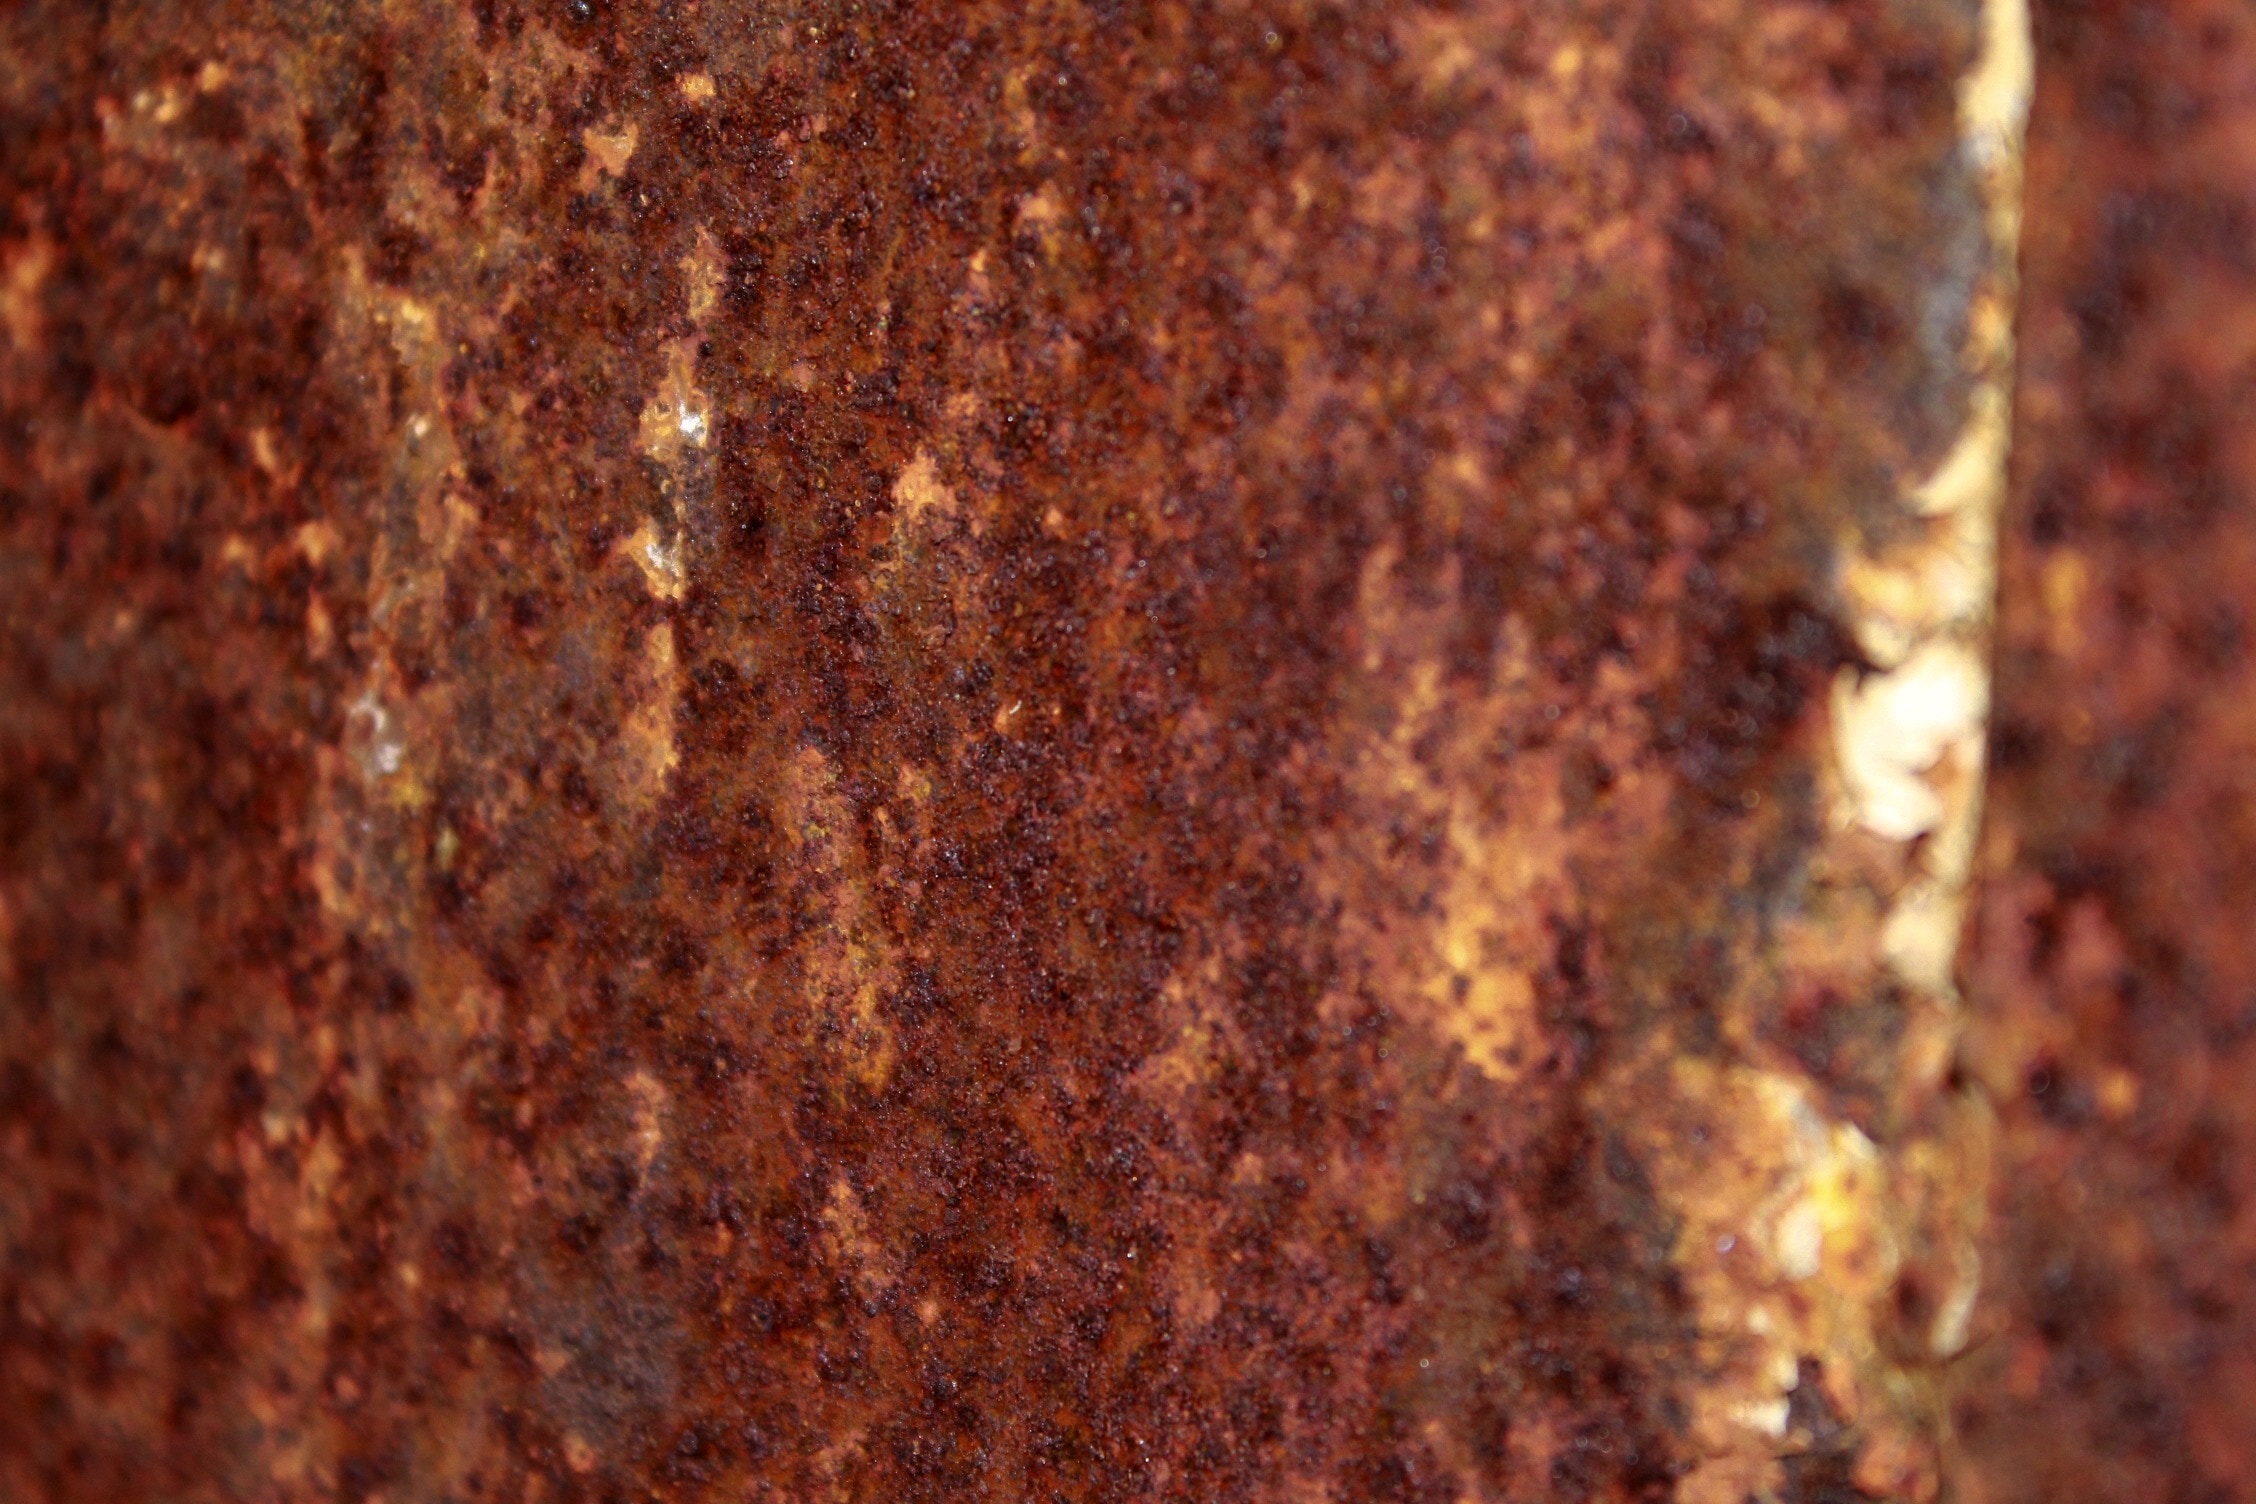 343 royalty free rust images | Peakpx